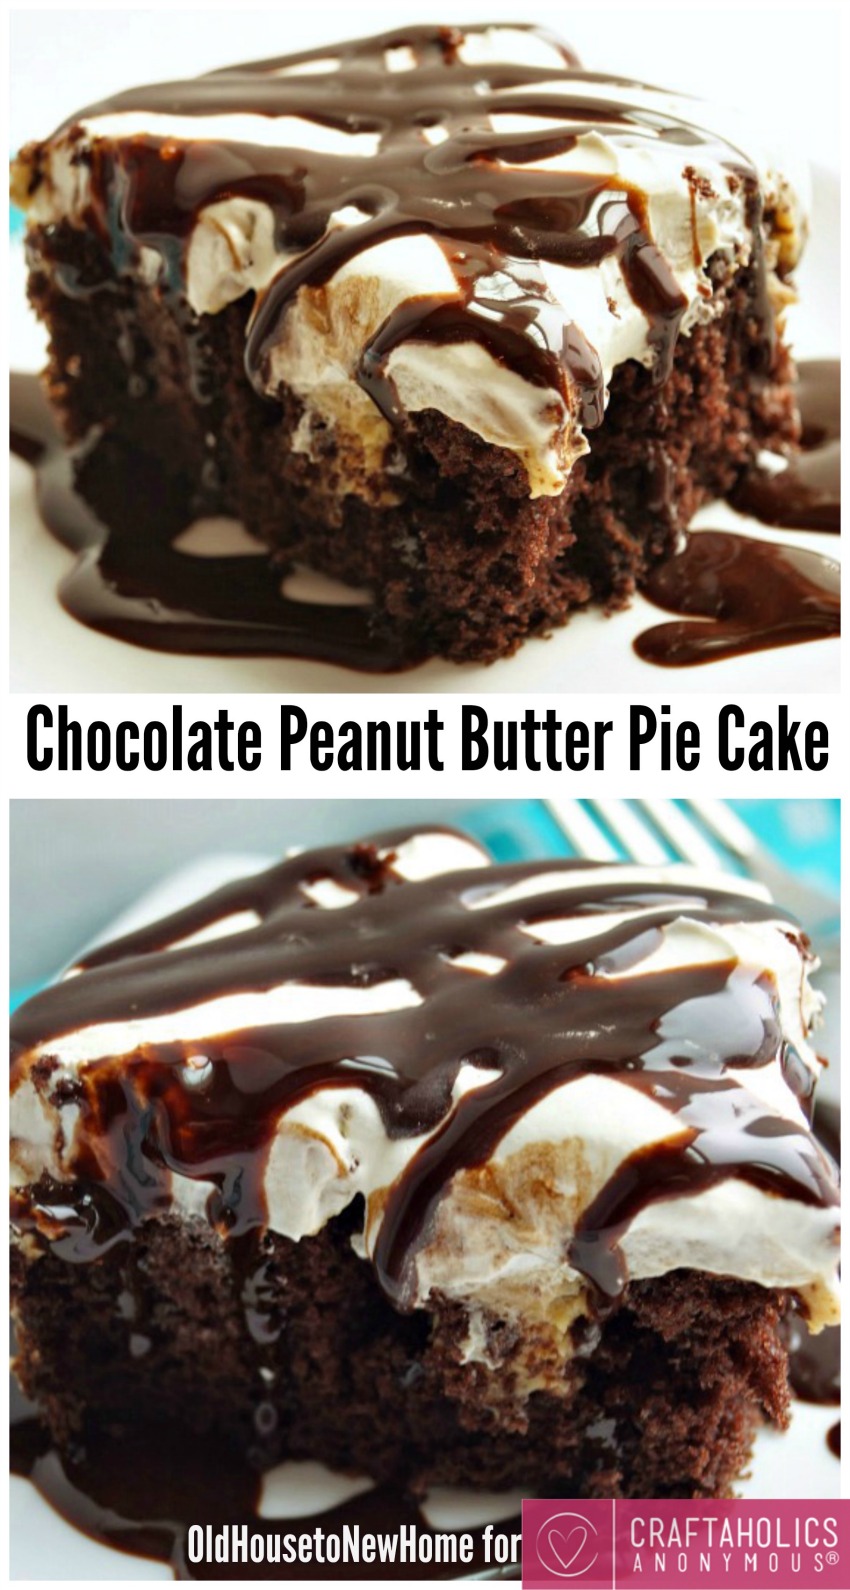 Chocolate Peanut Butter Pie Cake Recipe || The most AMAZING Chocolate Peanut butter dessert eVeR!! Rich Chocolate cake on the bottom with thick, salty, creamy peanut button top. To die for!